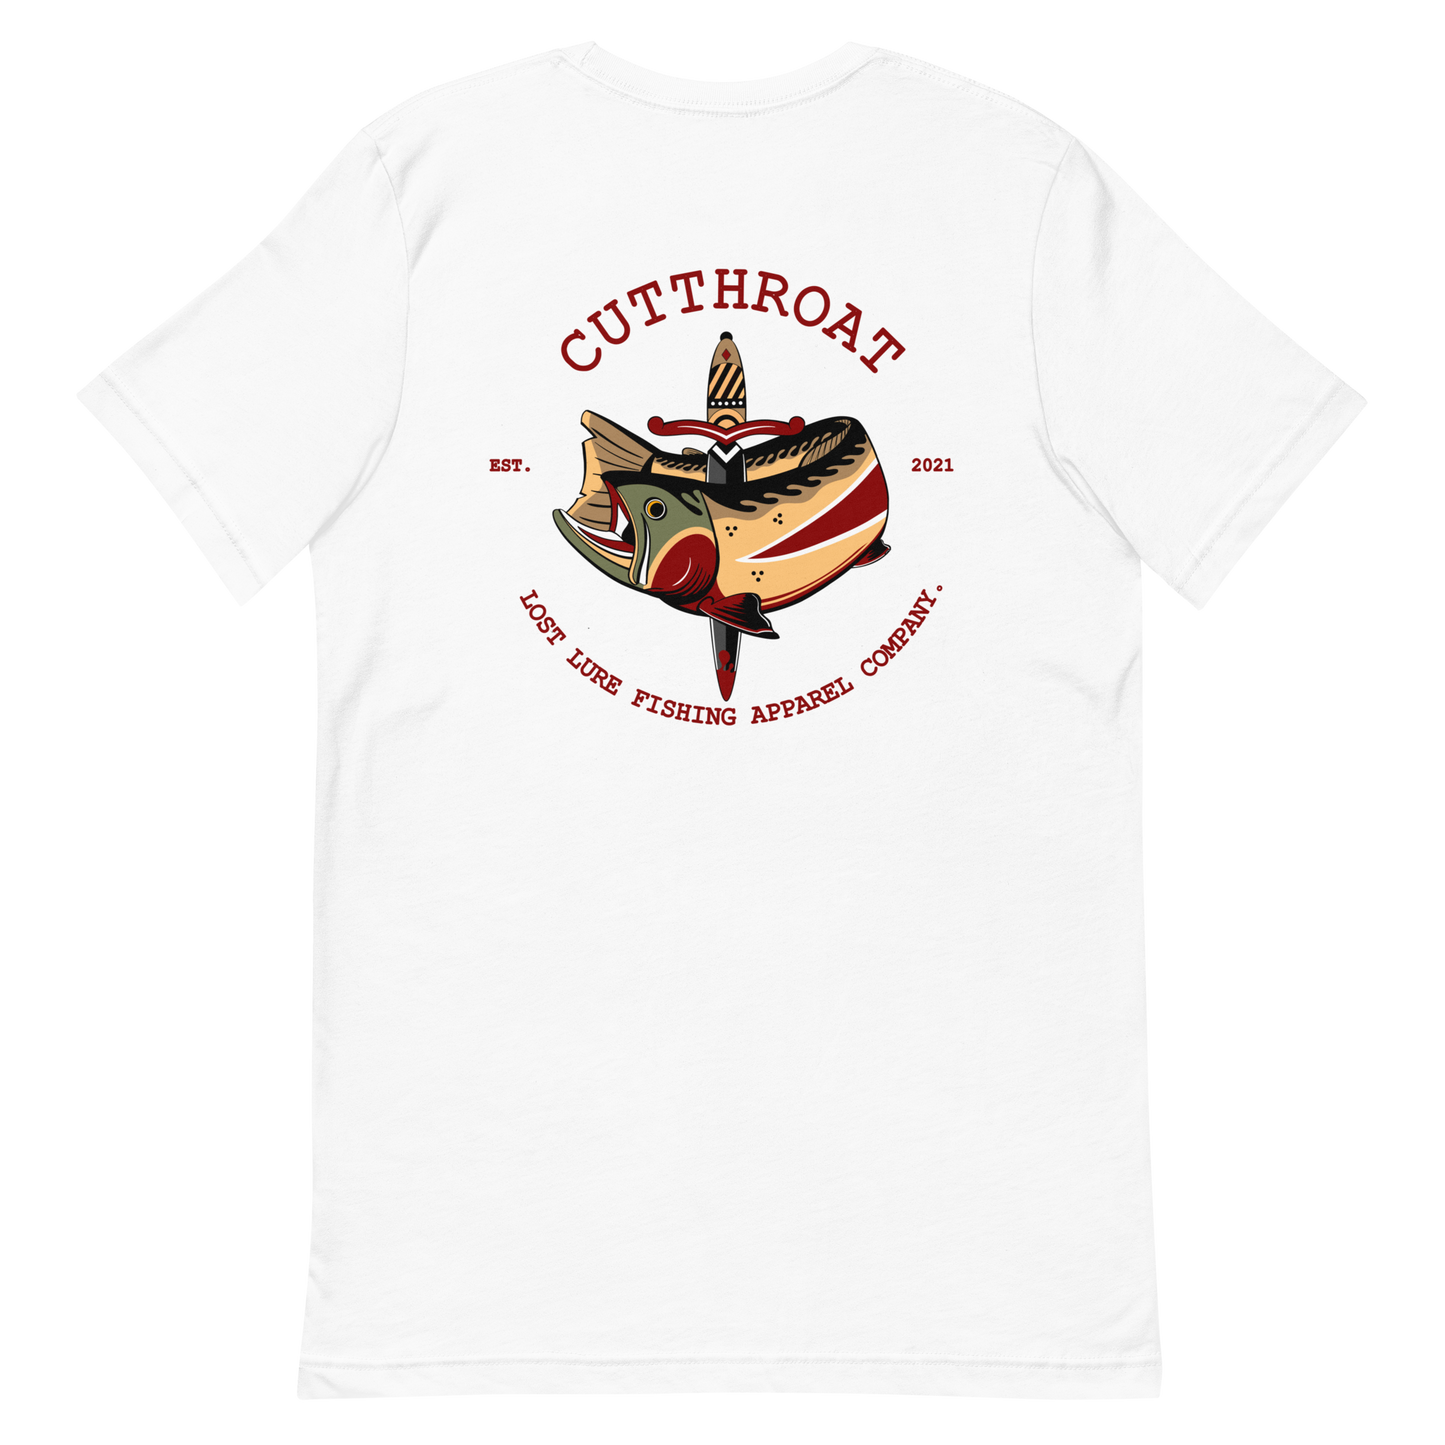 Cutthroat Trout fishing shirt. It’s an American traditional style design with a cutthroat trout and a dagger. The shirt reads Cutthroat trout, est. 2021, lost lure fishing apparel company. The front of the shirt has the lost lure logo. White fishing shirt, back side